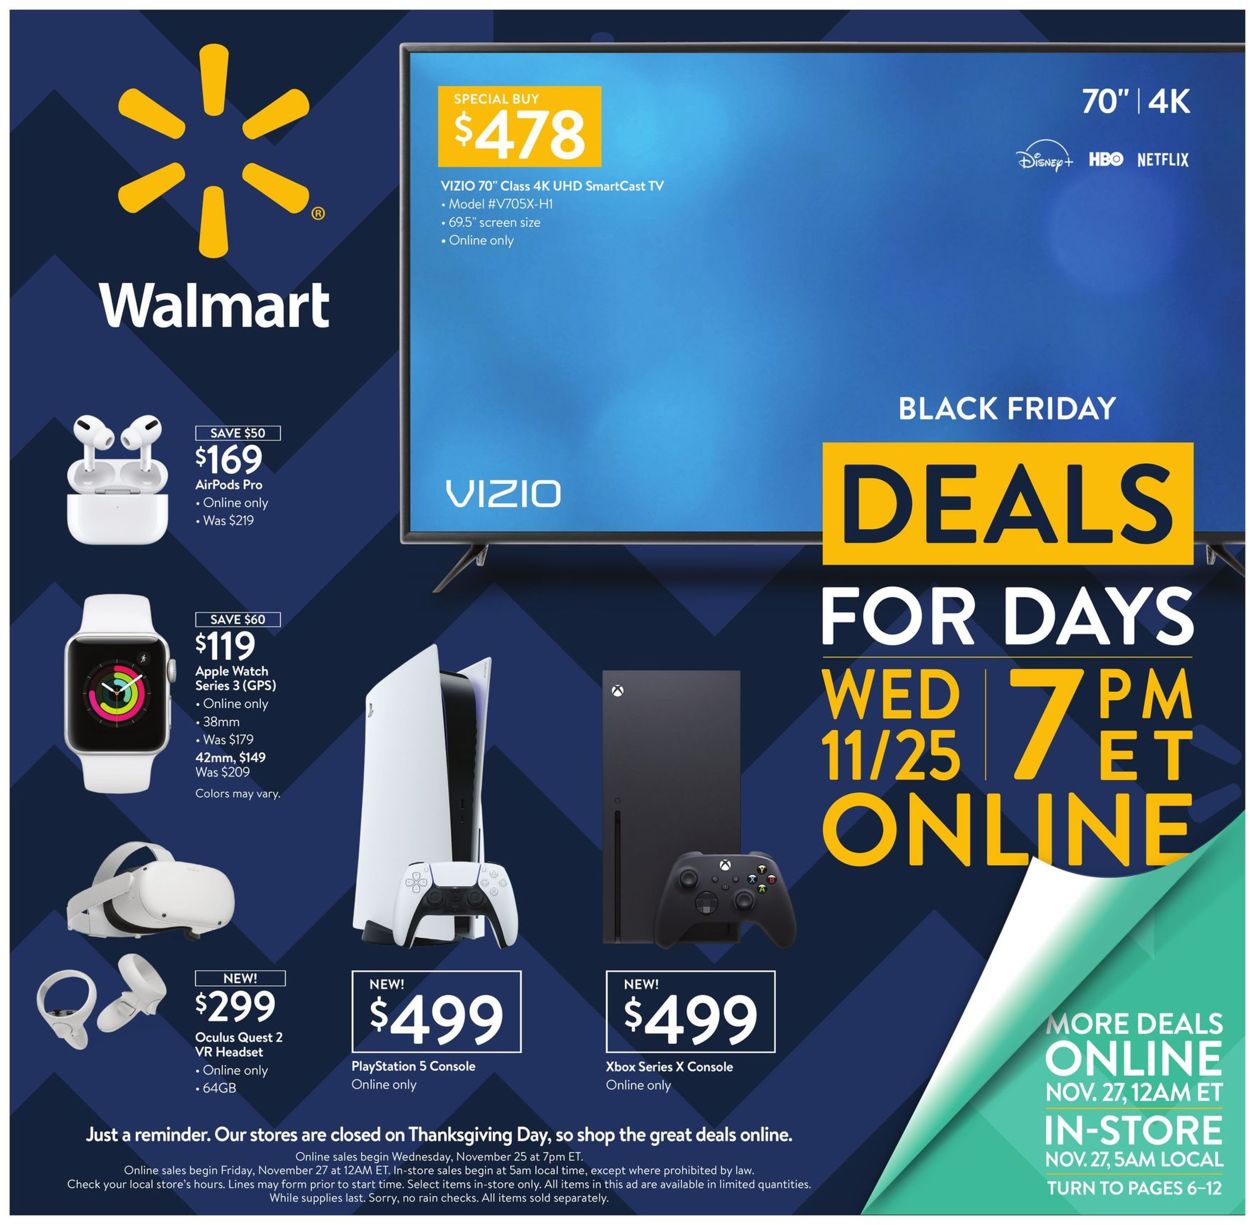 Walmart Black Friday 2020 Current weekly ad 11/25 - 11/28/2020 - What Time Can You Buy Walmart Black Friday Deals Online